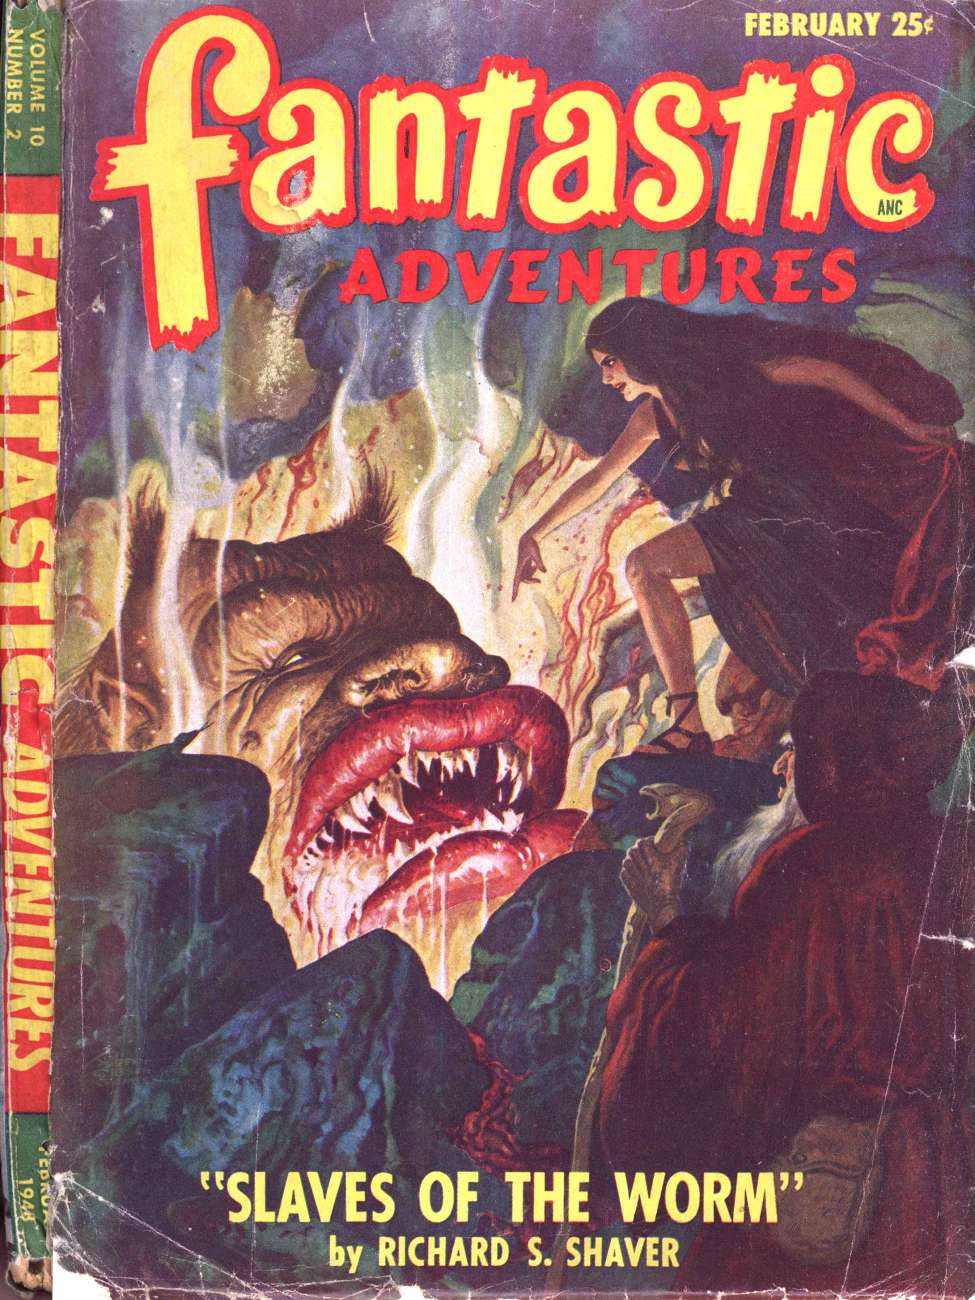 Book Cover For Fantastic Adventures v10 2 - Slaves of the Worm - Richard S. Shaver